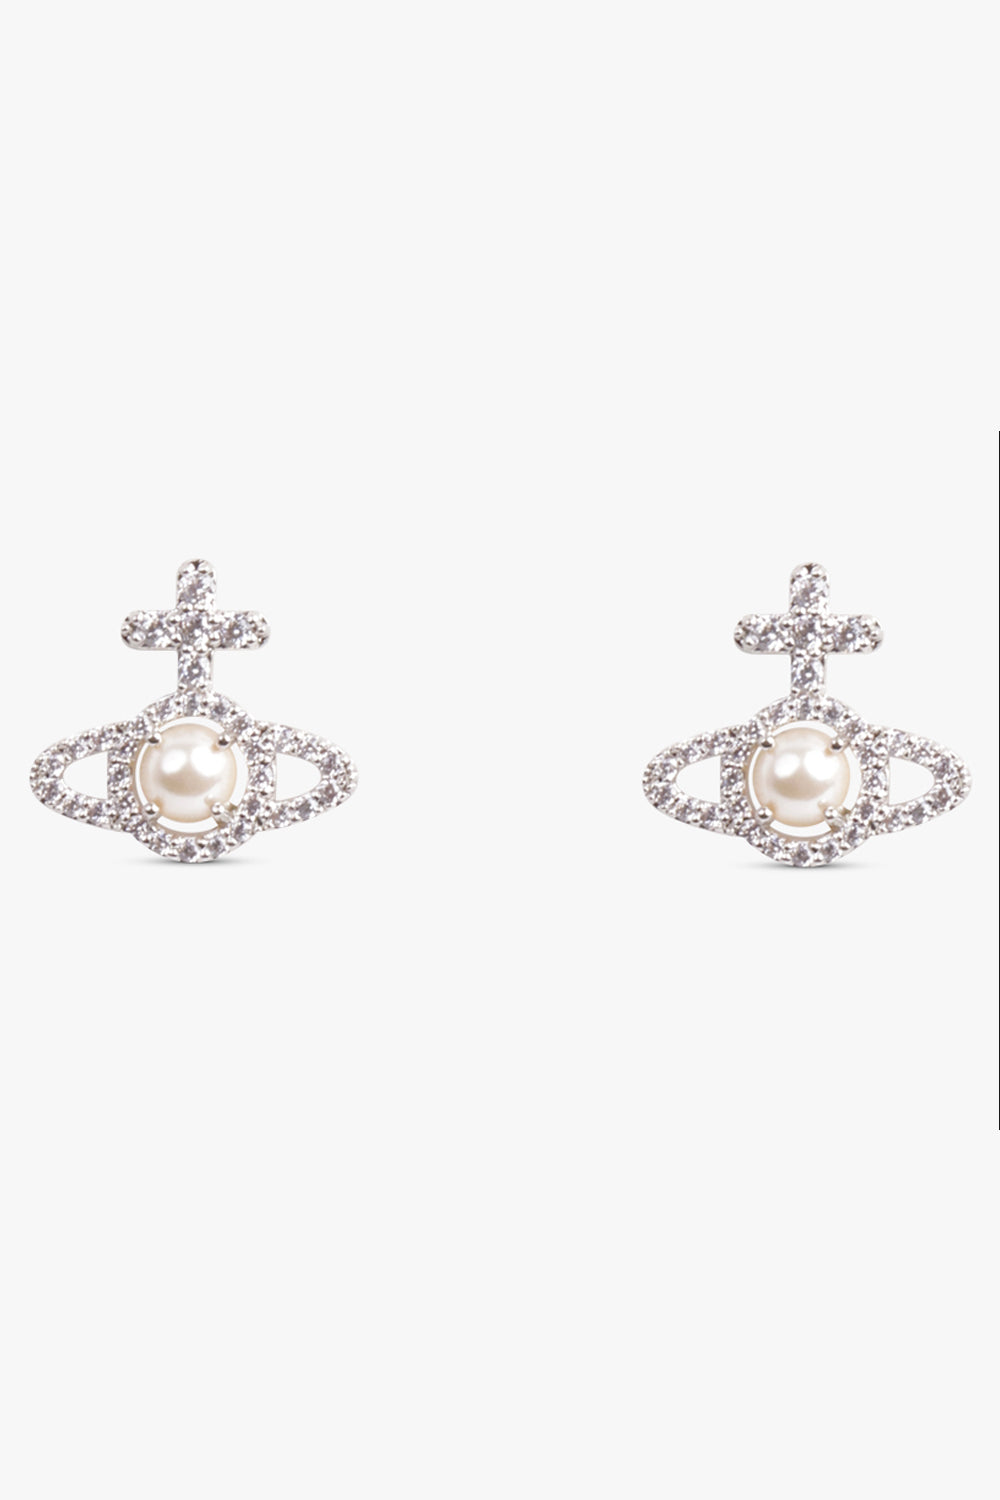 VIVIENNE WESTWOOD JEWELLRY SILVER / SILVER OLYMPIA PEARL EARRINGS | CREAM ROSE PEARL/SILVER